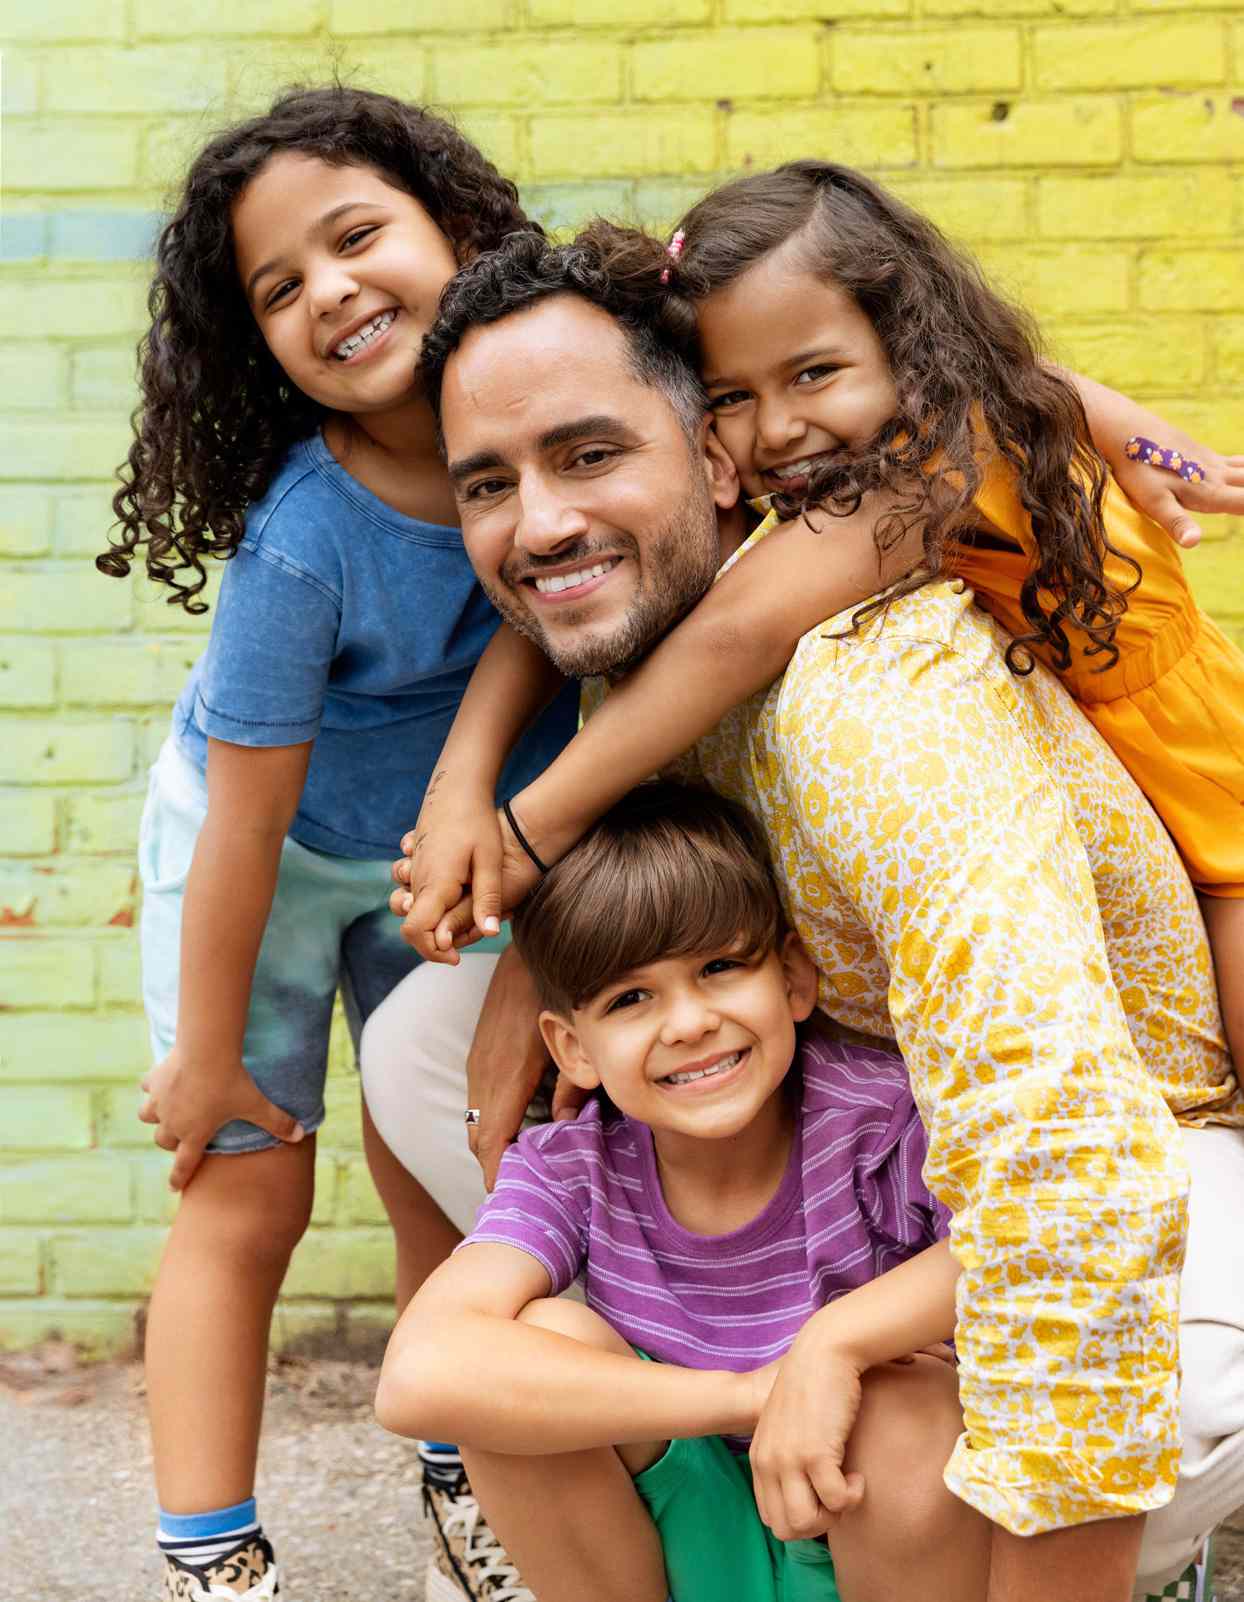 Jose with three kids in colorful outfits